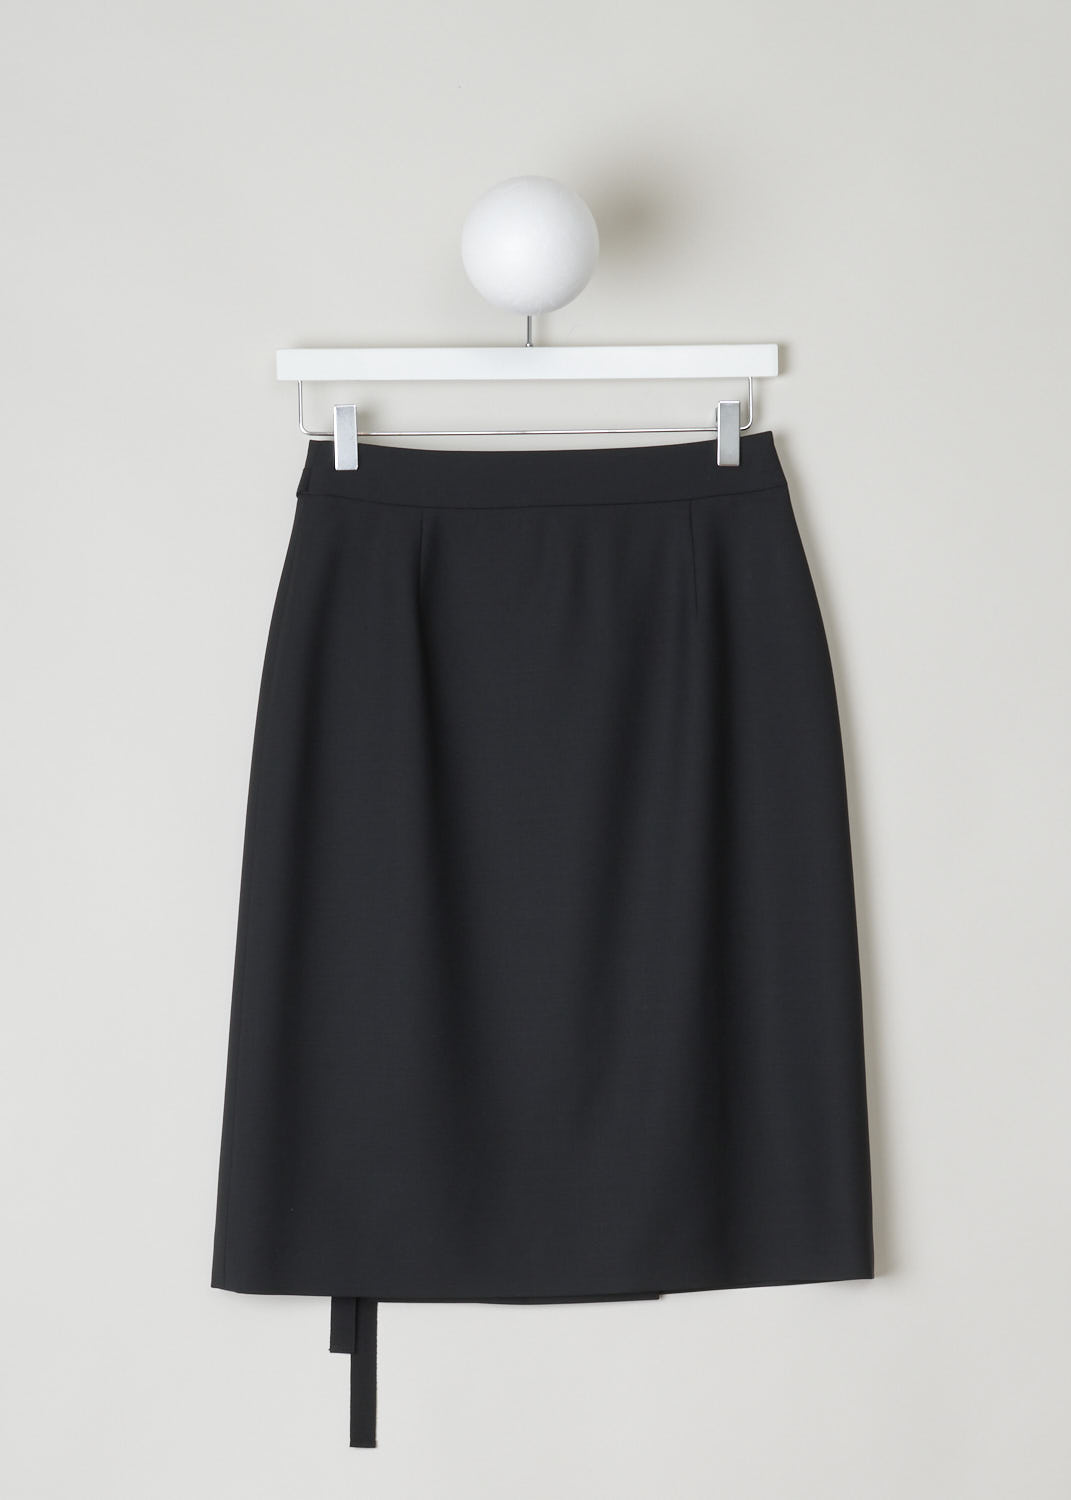 PRADA, BLACK WRAP SKIRT WITH BUTTONS AND TIE DETAIL, 
KID_MOHAIR_P122R_NERO, Black, Back, Black wrap skirt with three contrasting mother-of-pearl buttons on the side. Above the buttons, a black ribbon tie detail can be found. Both the buttons and the tie function as the closure option, as well as a concealed button and hook on the inside. 